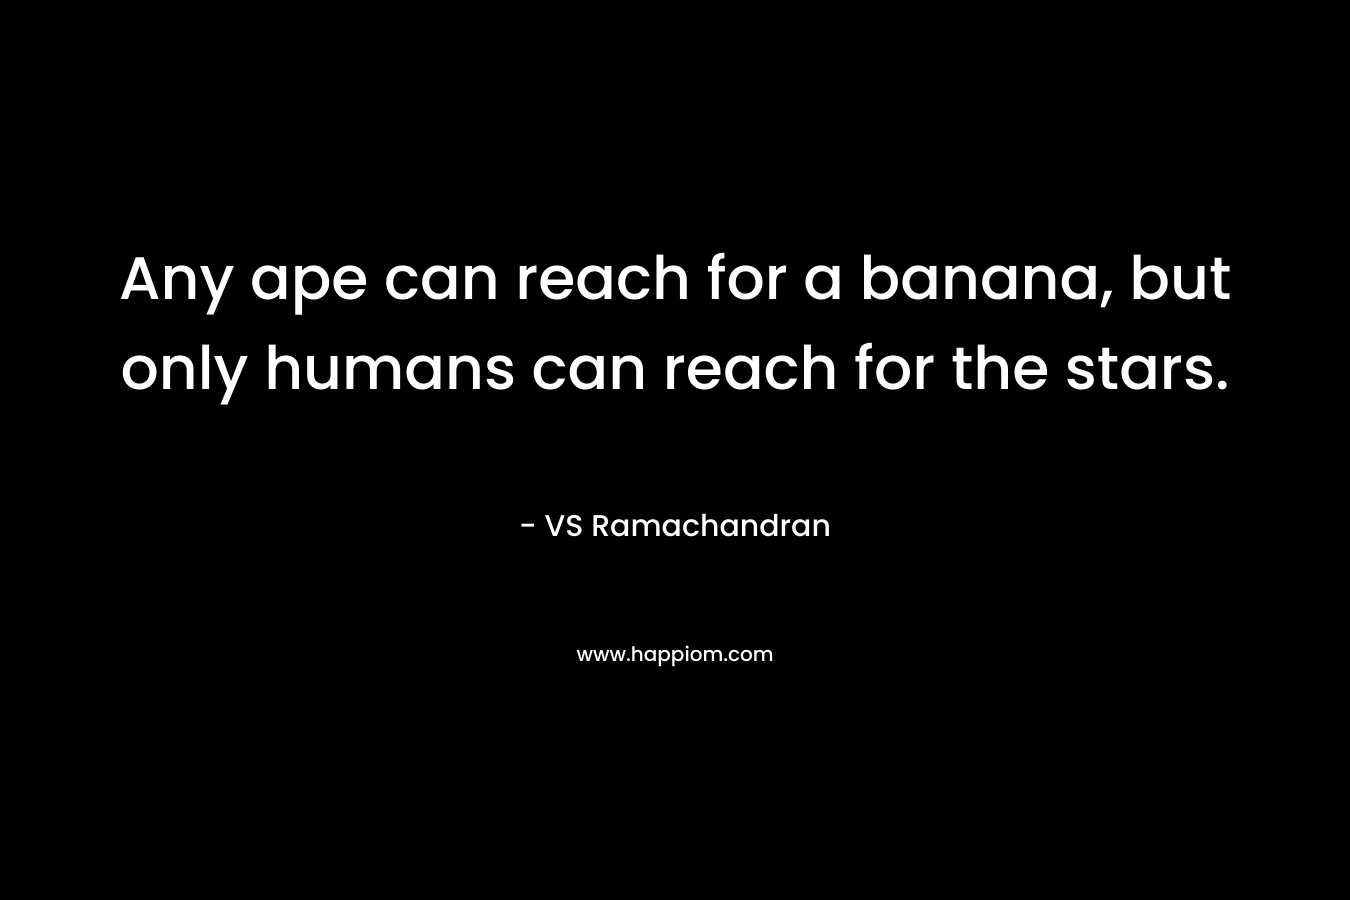 Any ape can reach for a banana, but only humans can reach for the stars.